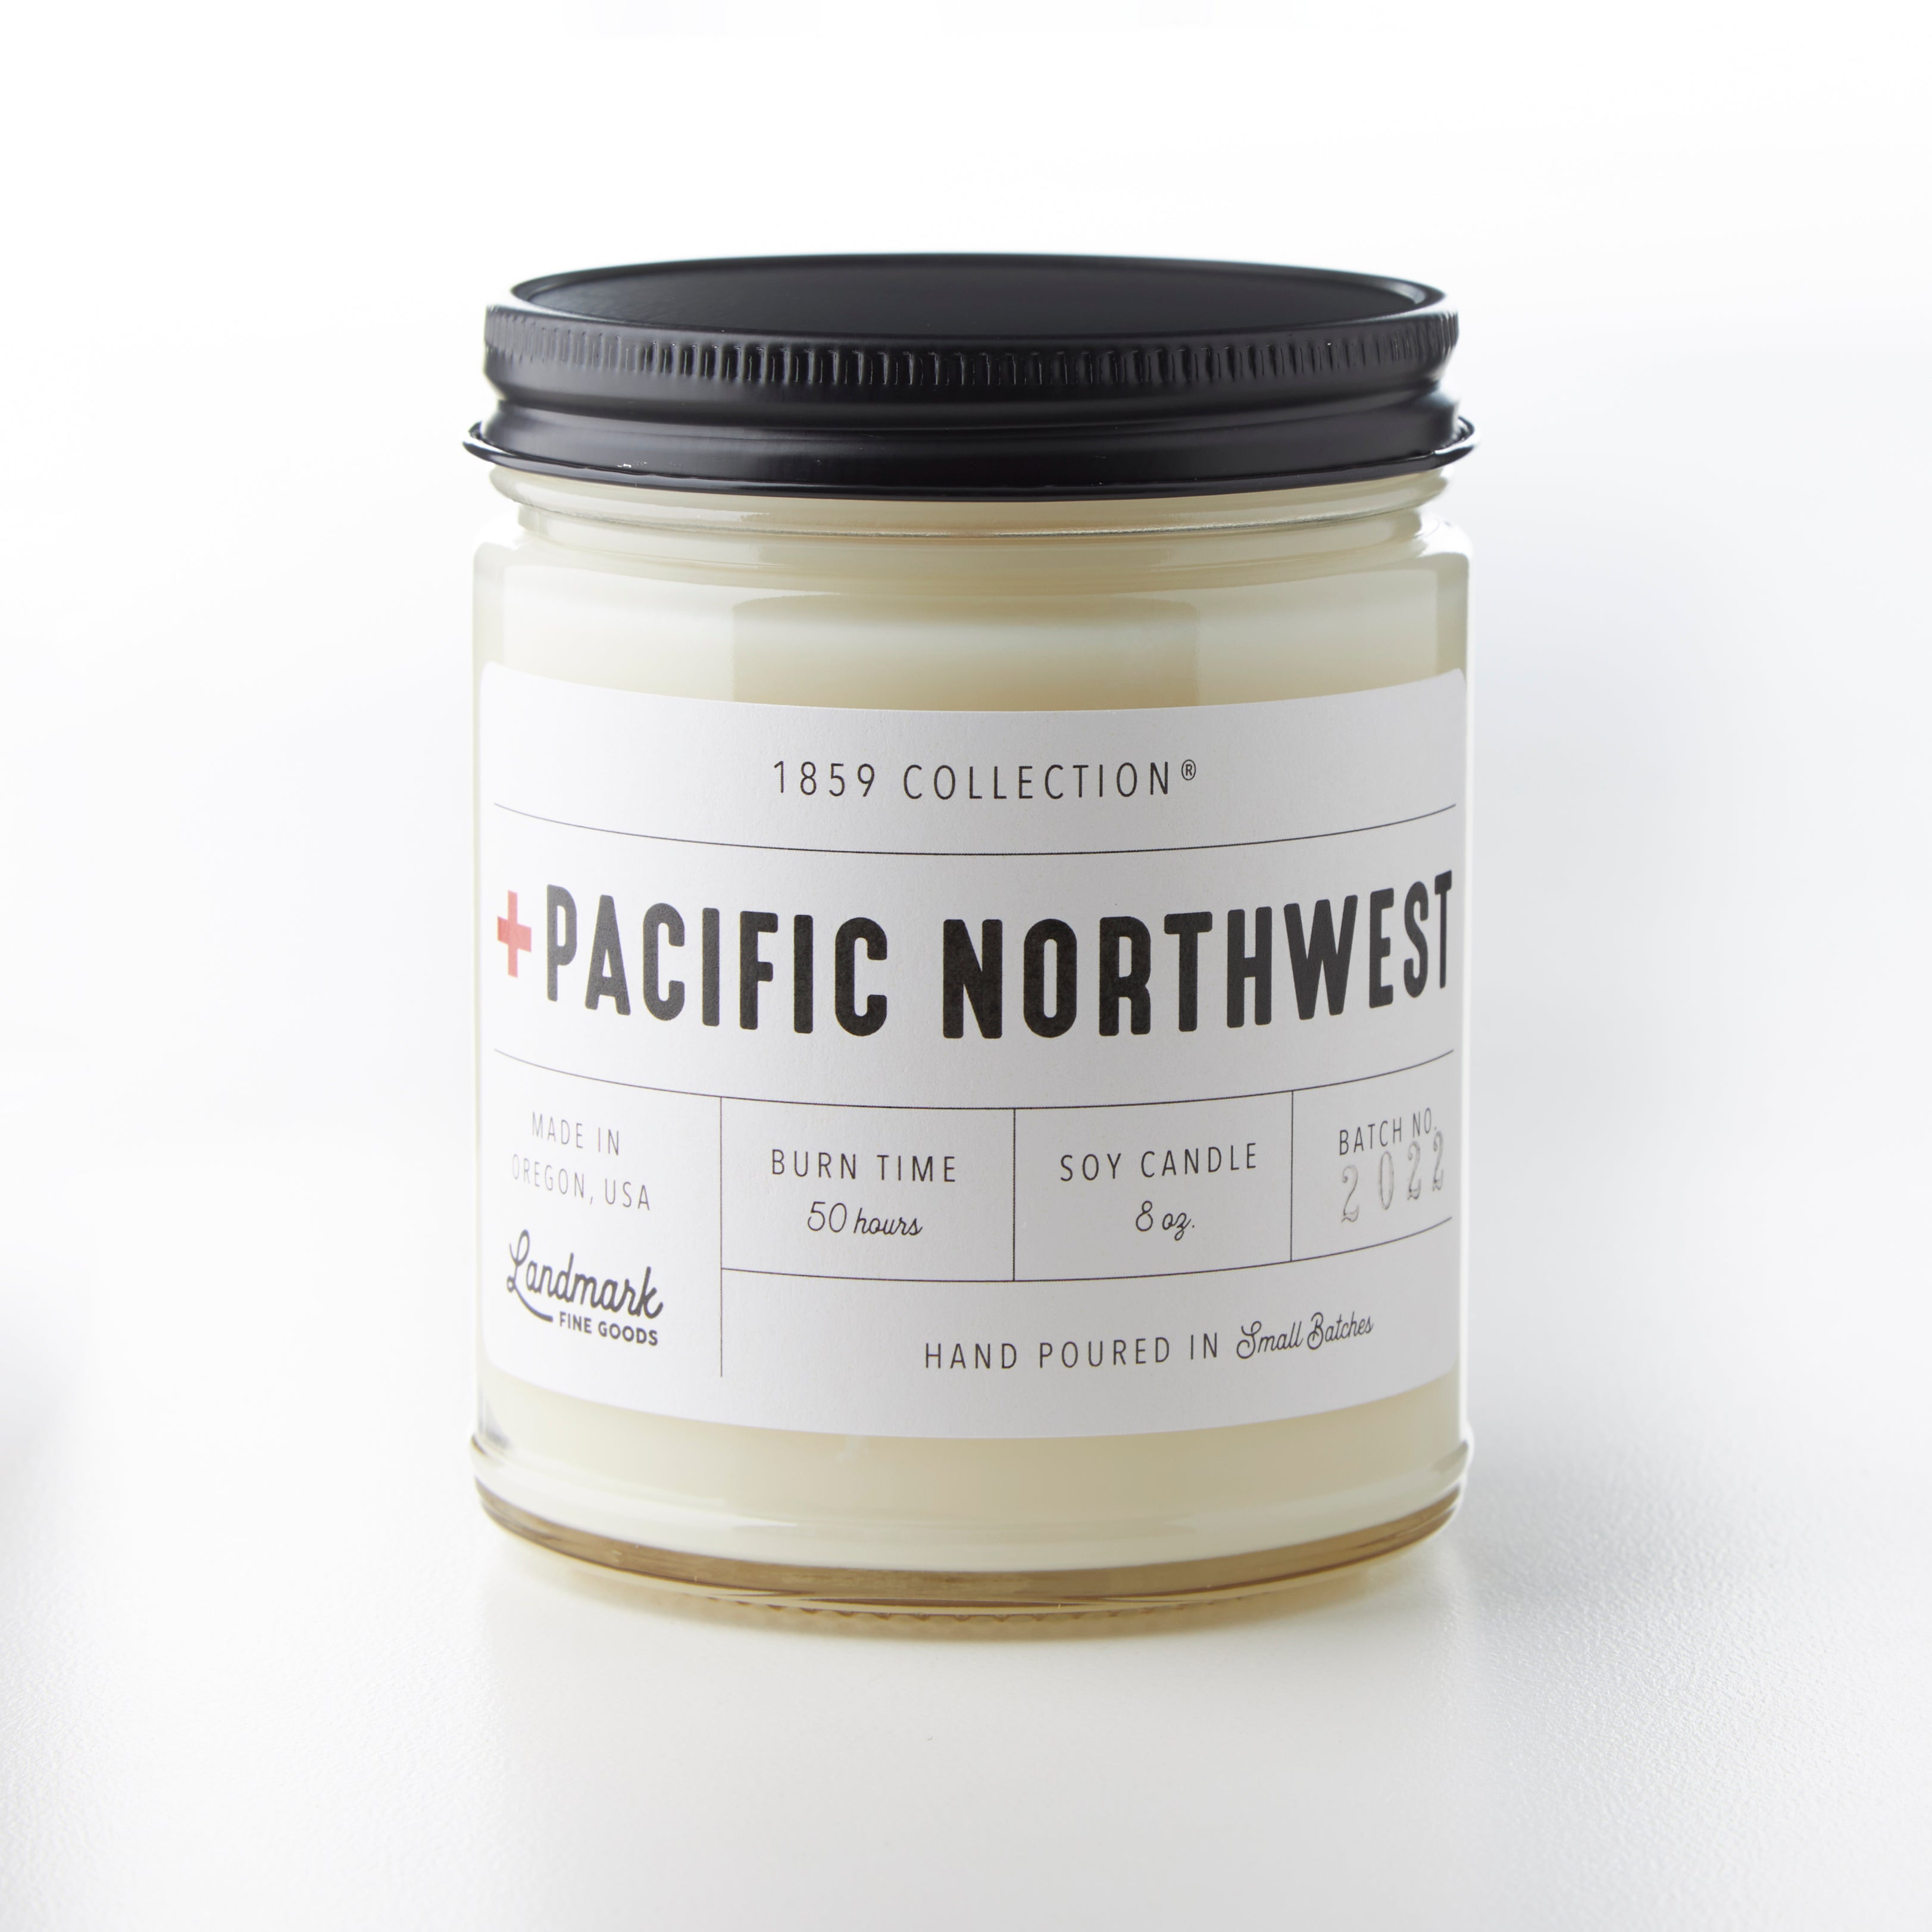 Pacific Northwest Candle - 1859 Collection®